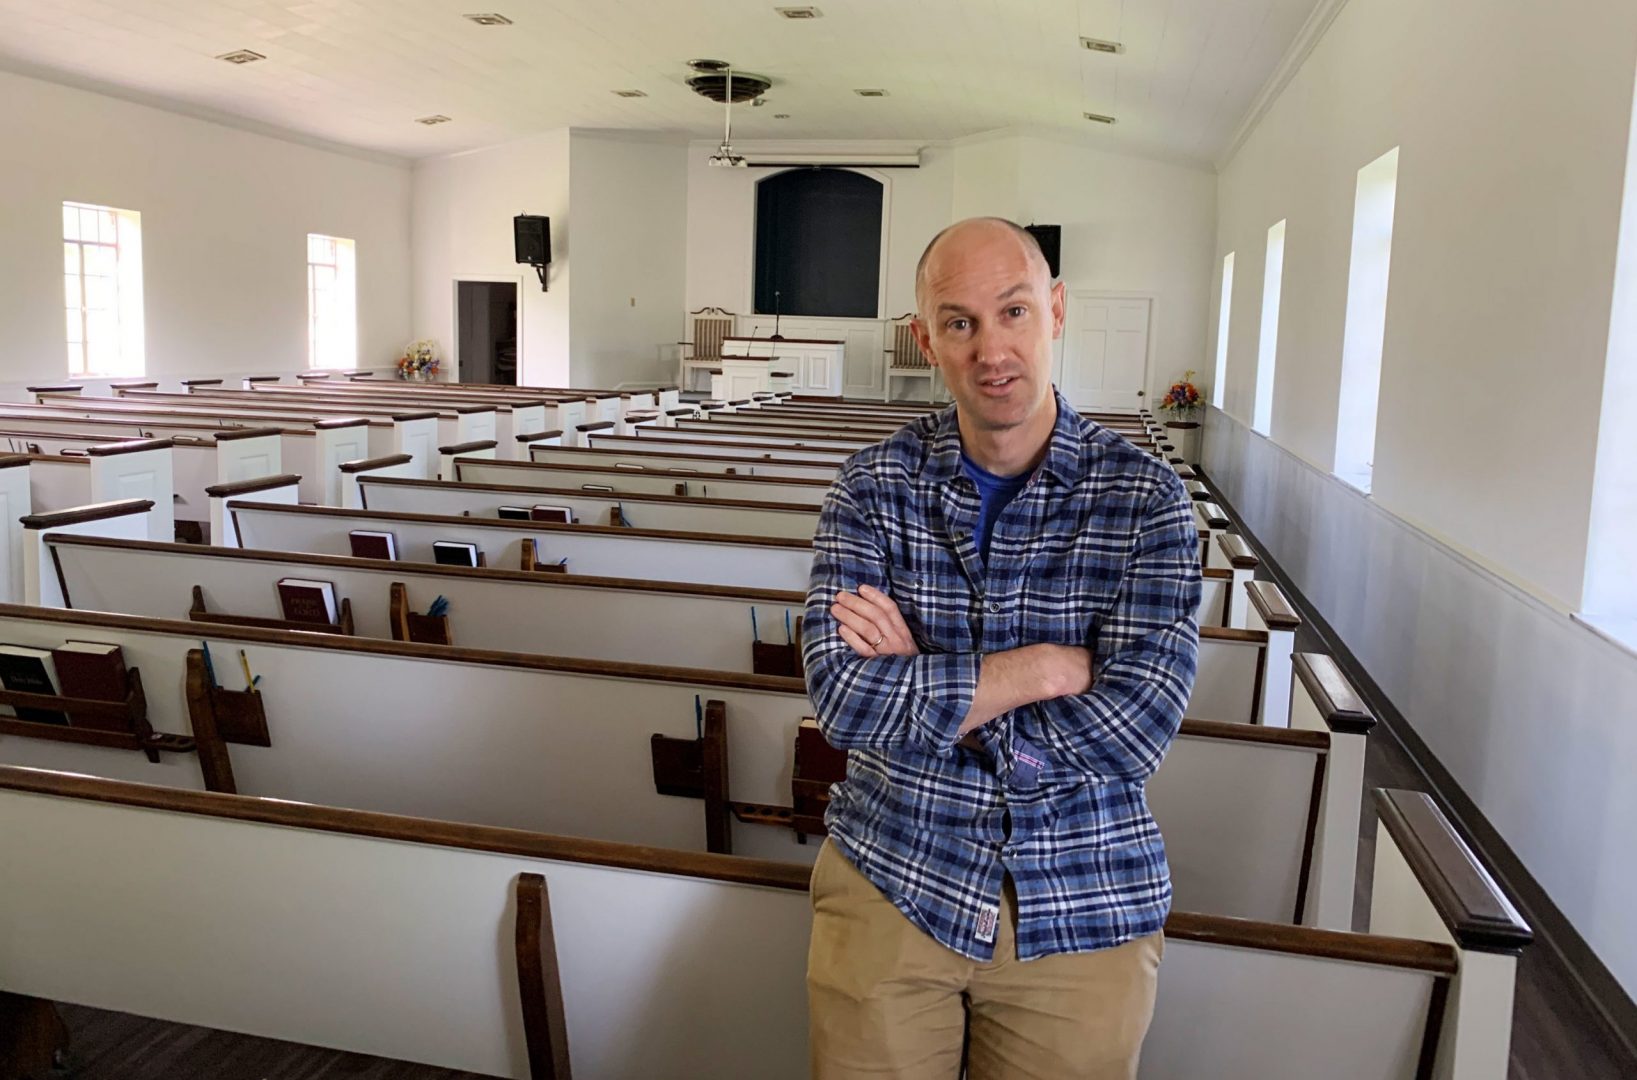 Pastor J.P. Conway leads the Acklen Avenue Church of Christ in Nashville. When members started telling him they got vaccinated, he began keeping track. Now, he says 99% have been immunized.